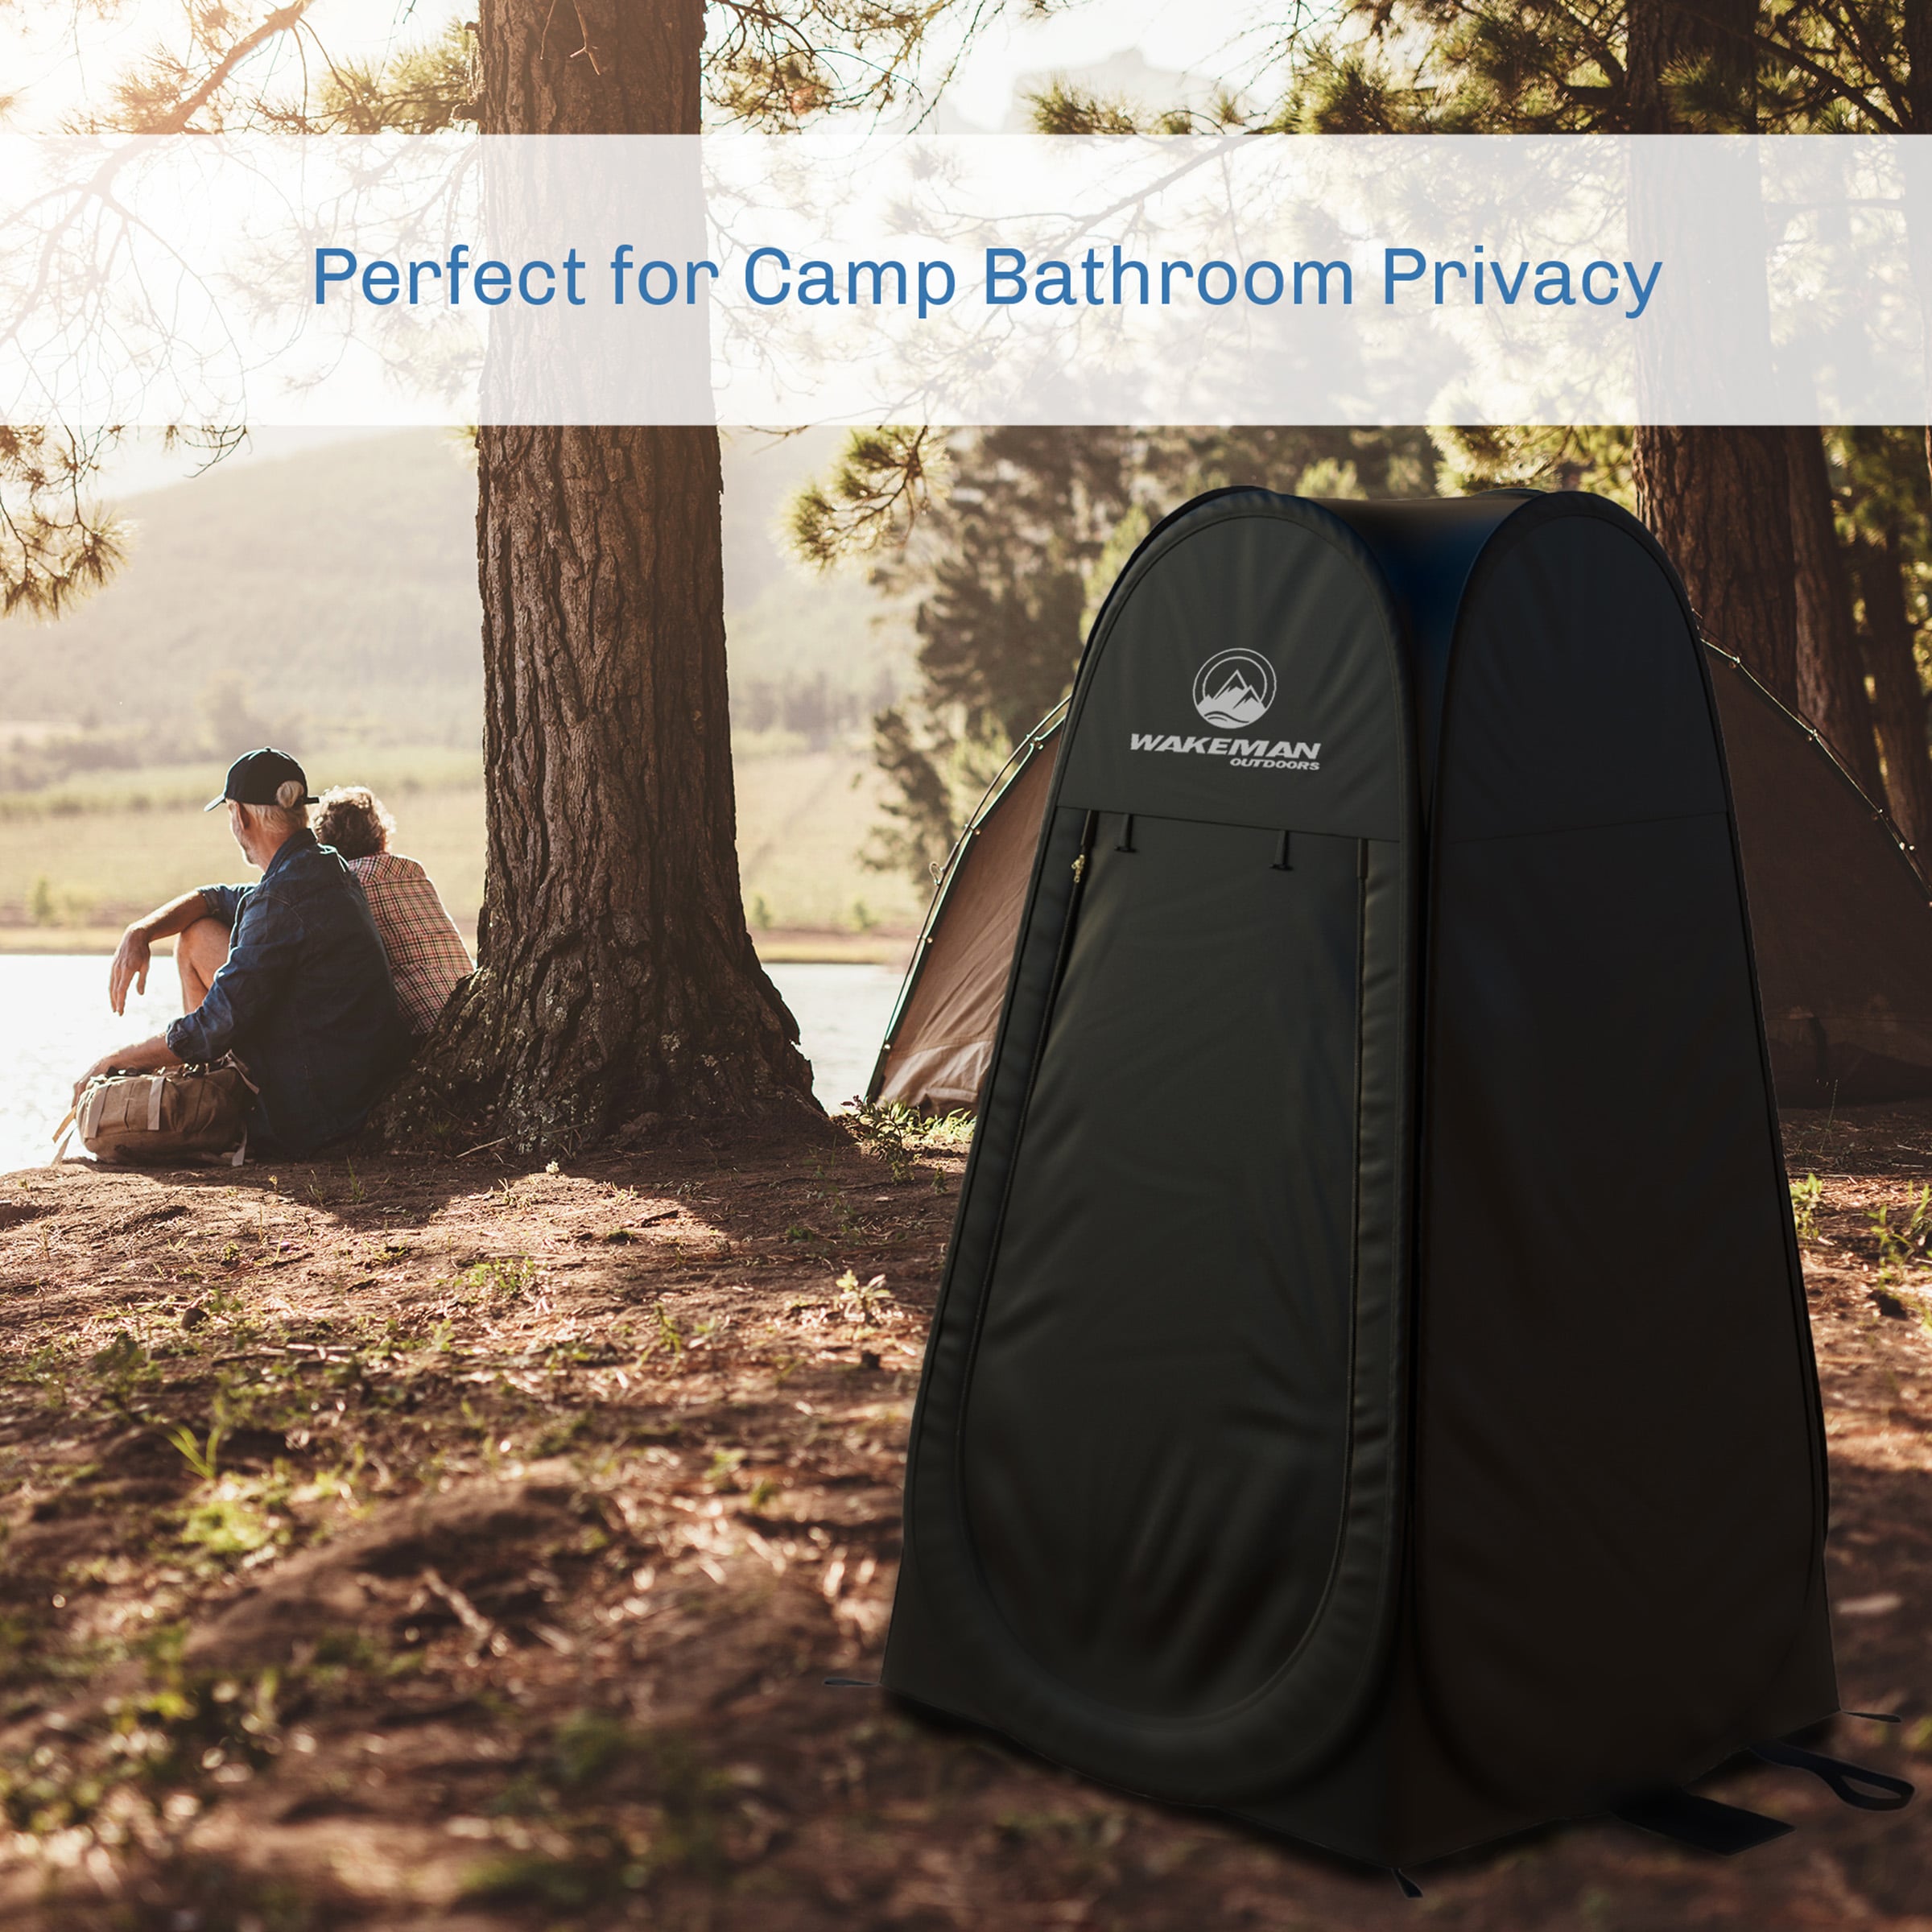 Portable Pop Up Pod- Instant Privacy, Shower & Changing Tent